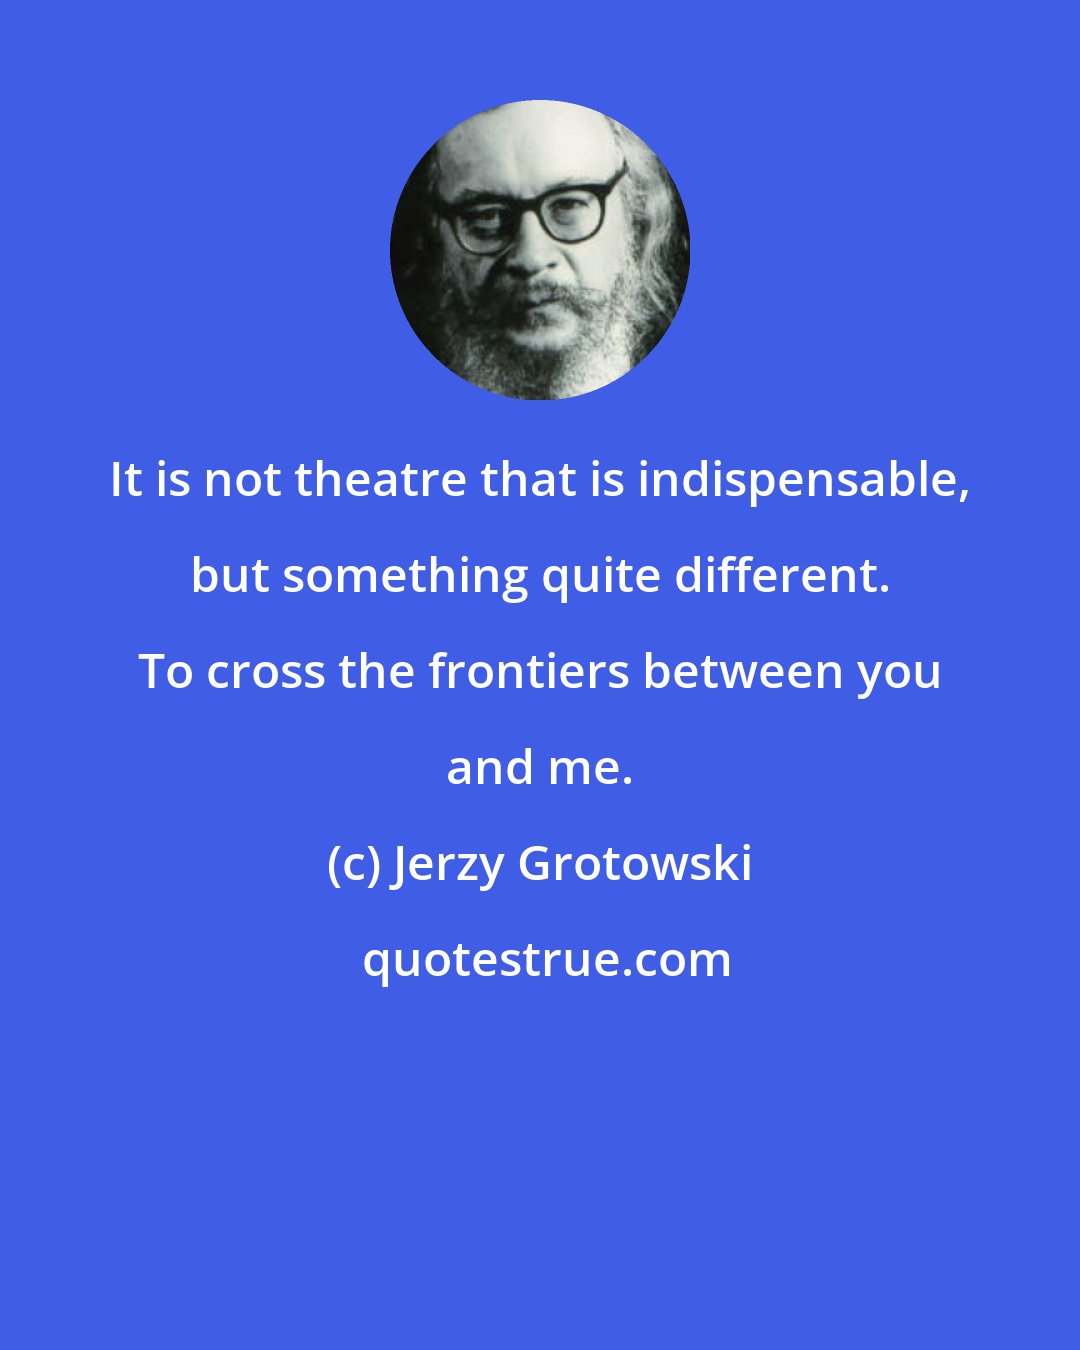 Jerzy Grotowski: It is not theatre that is indispensable, but something quite different. To cross the frontiers between you and me.